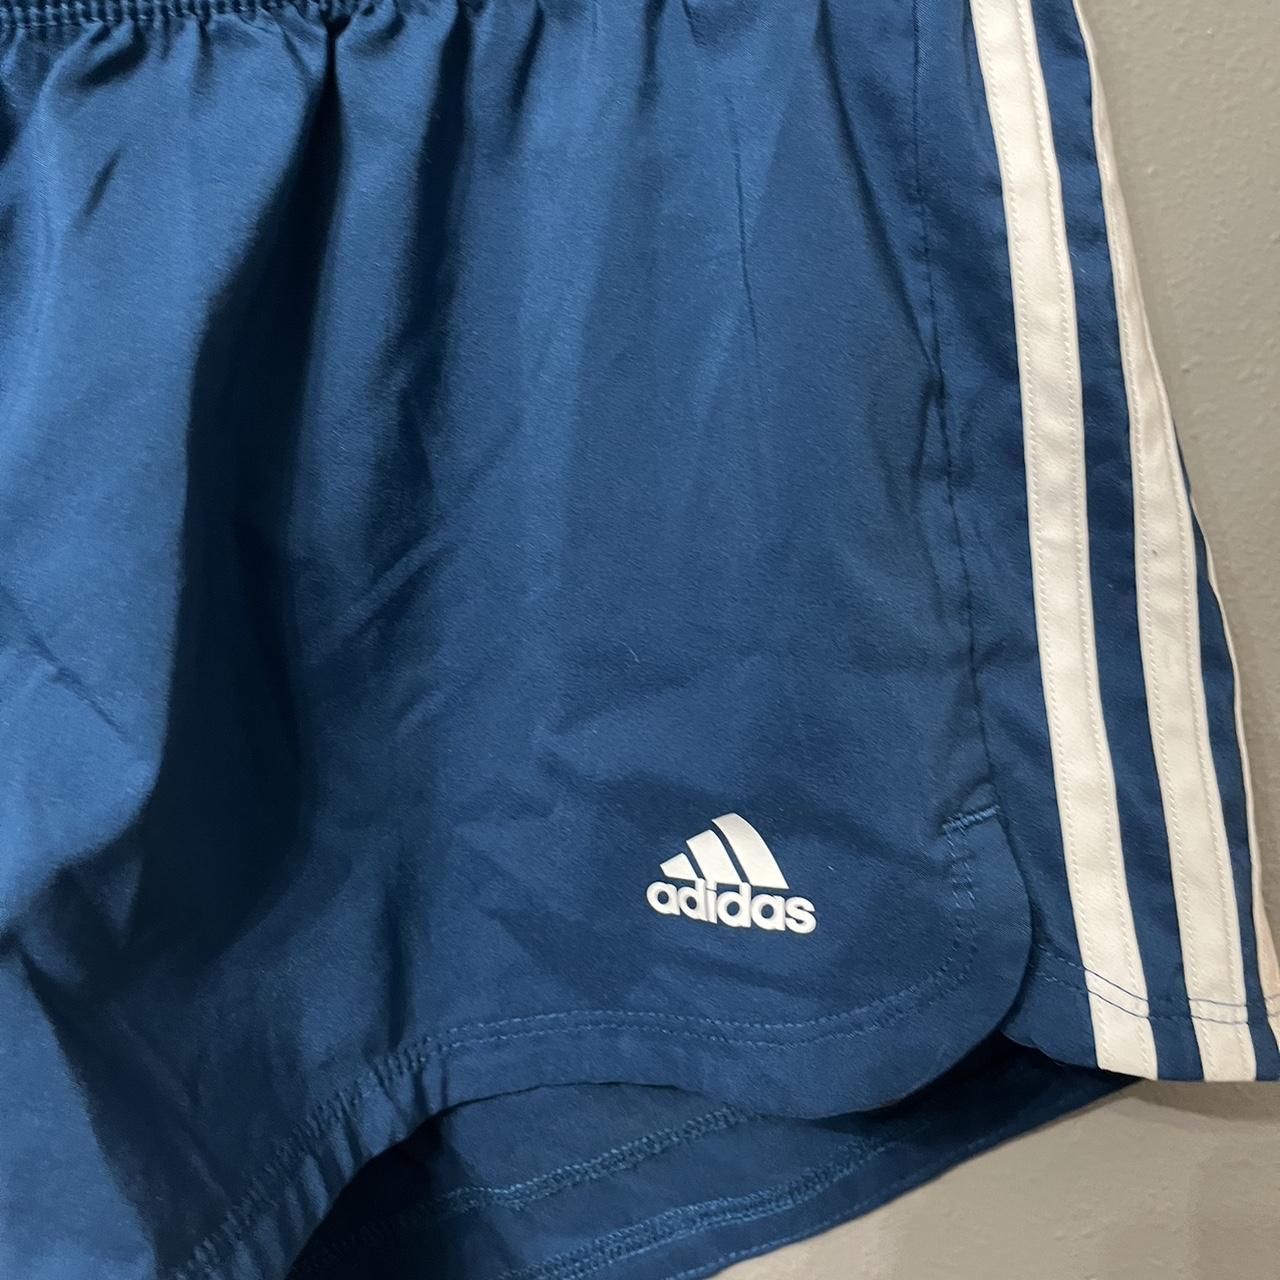 Adidas Women's Blue and White Shorts (2)